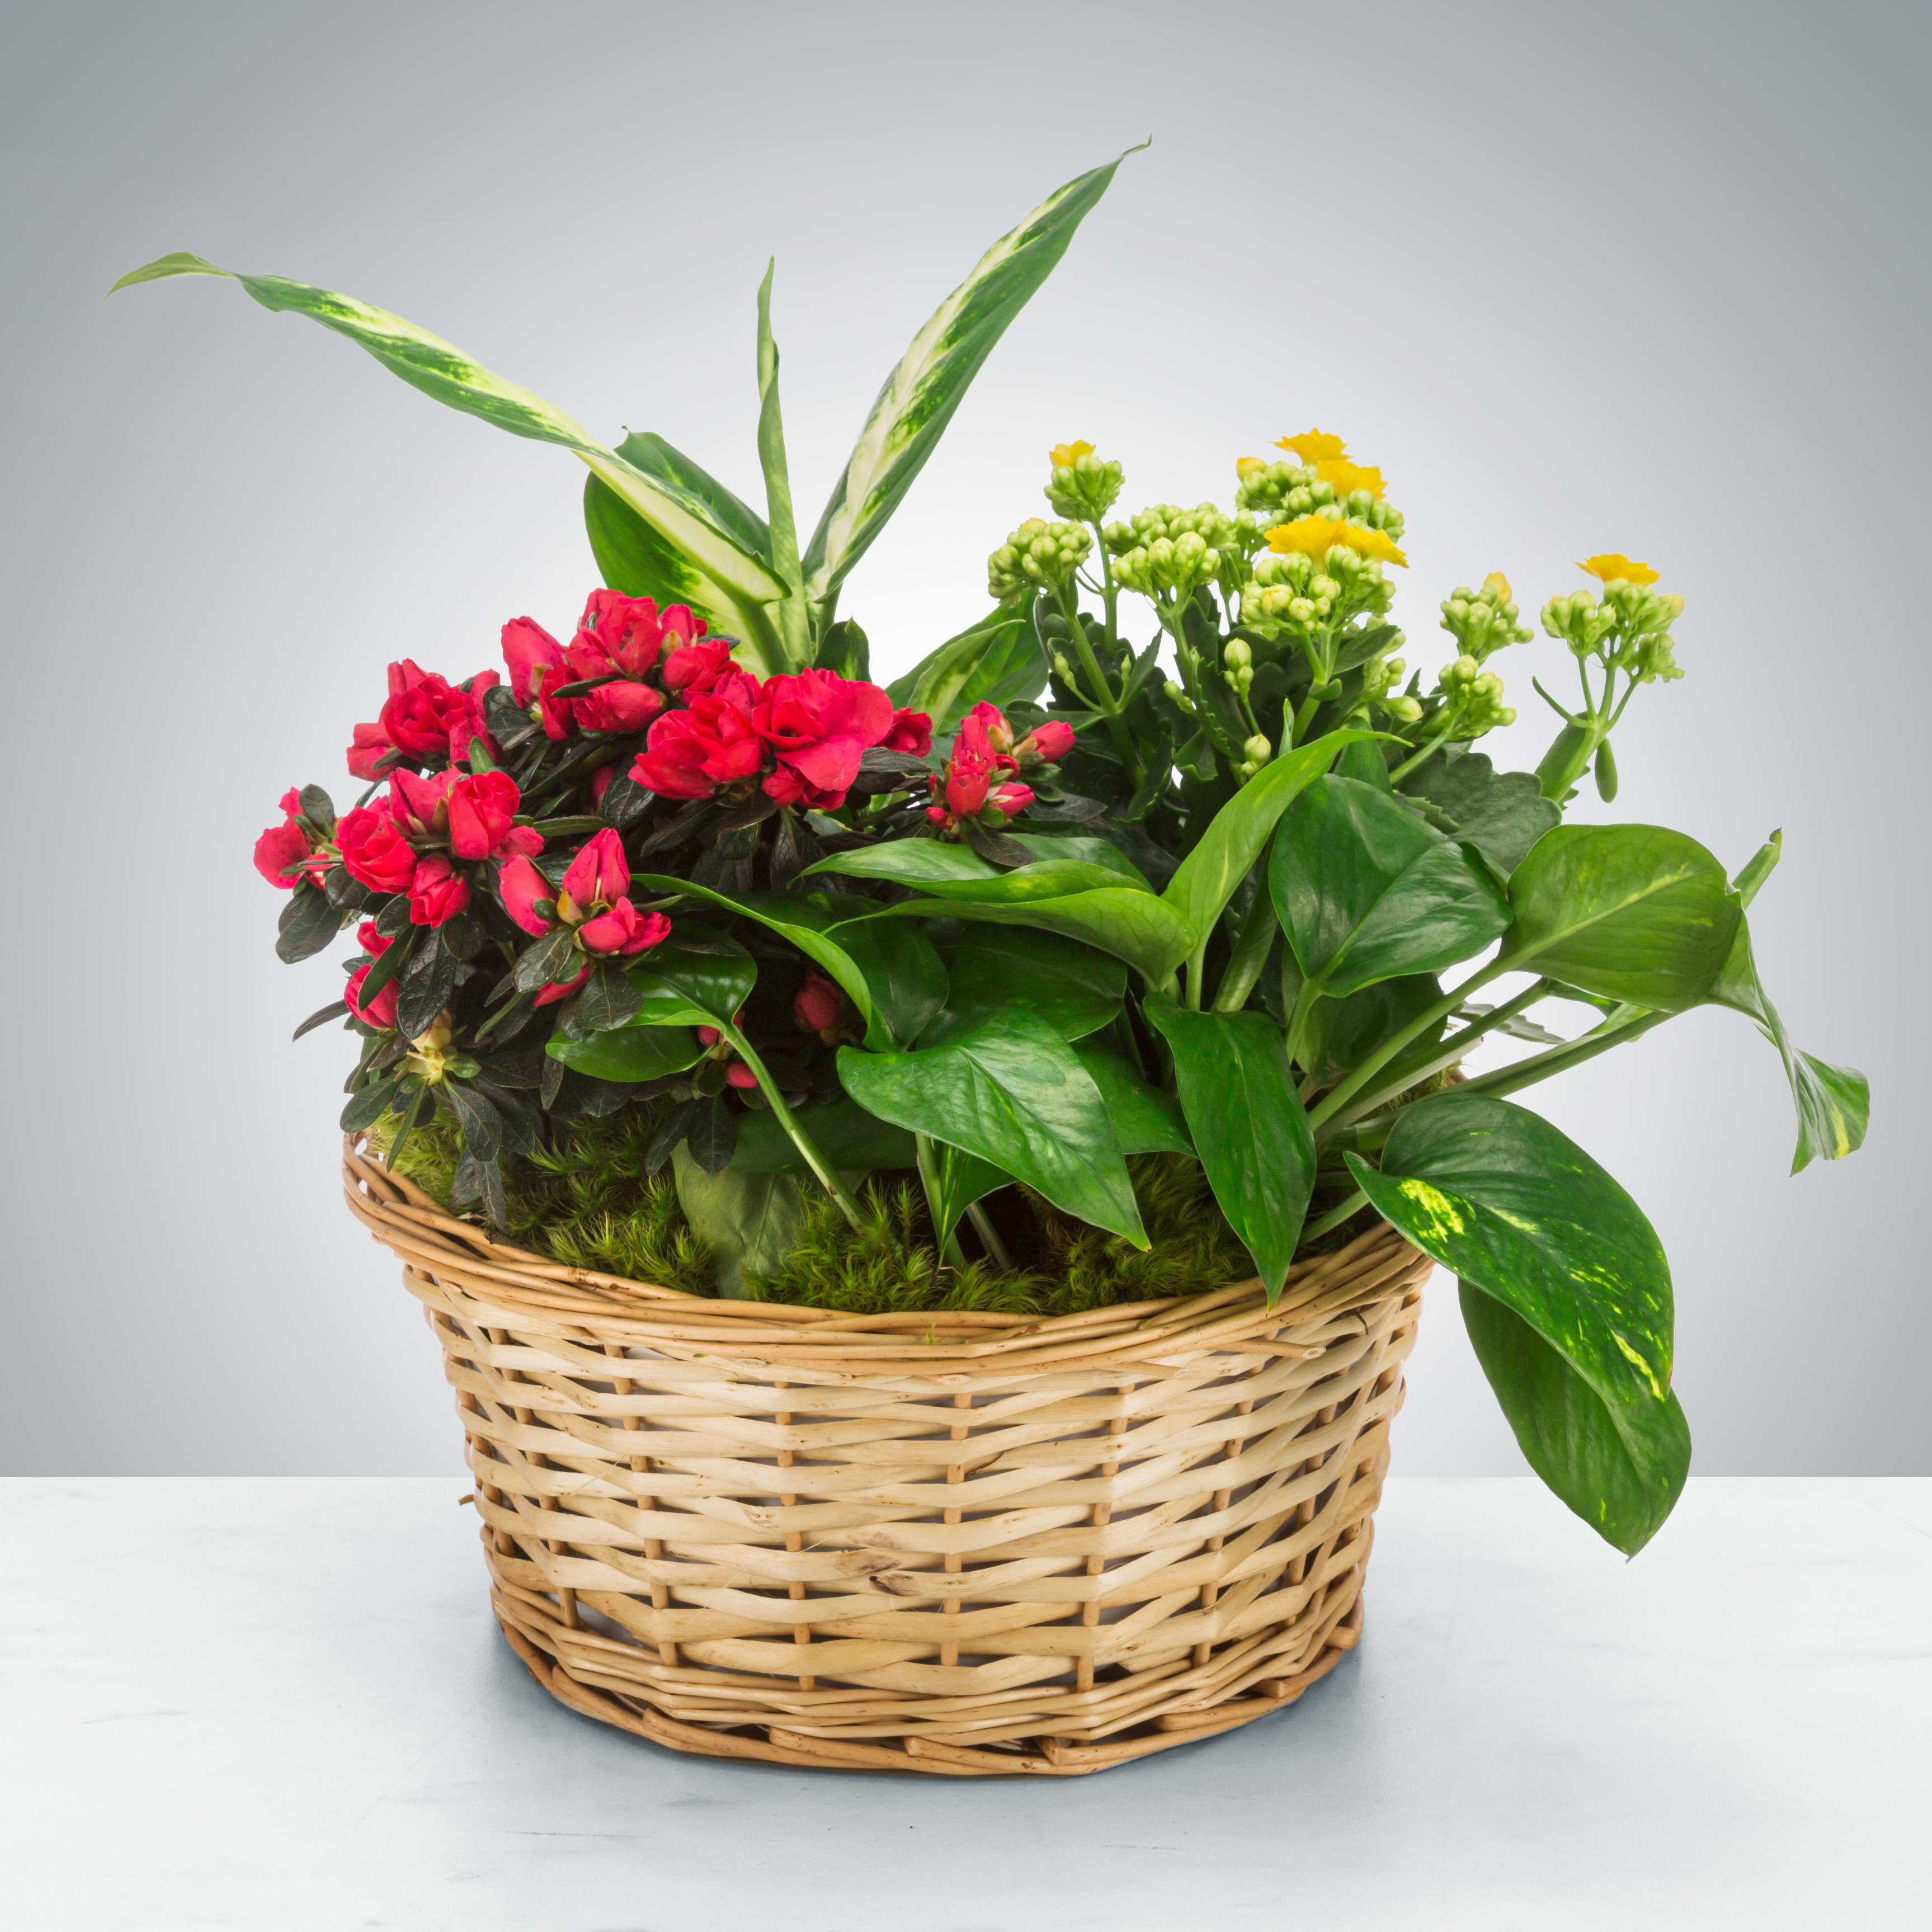 Mixed Plant Basket by BloomNation™ - Send a little garden to somebody. A mix of flowering plants and greenery make an excellent gift for father's day or as a way to say thank you.